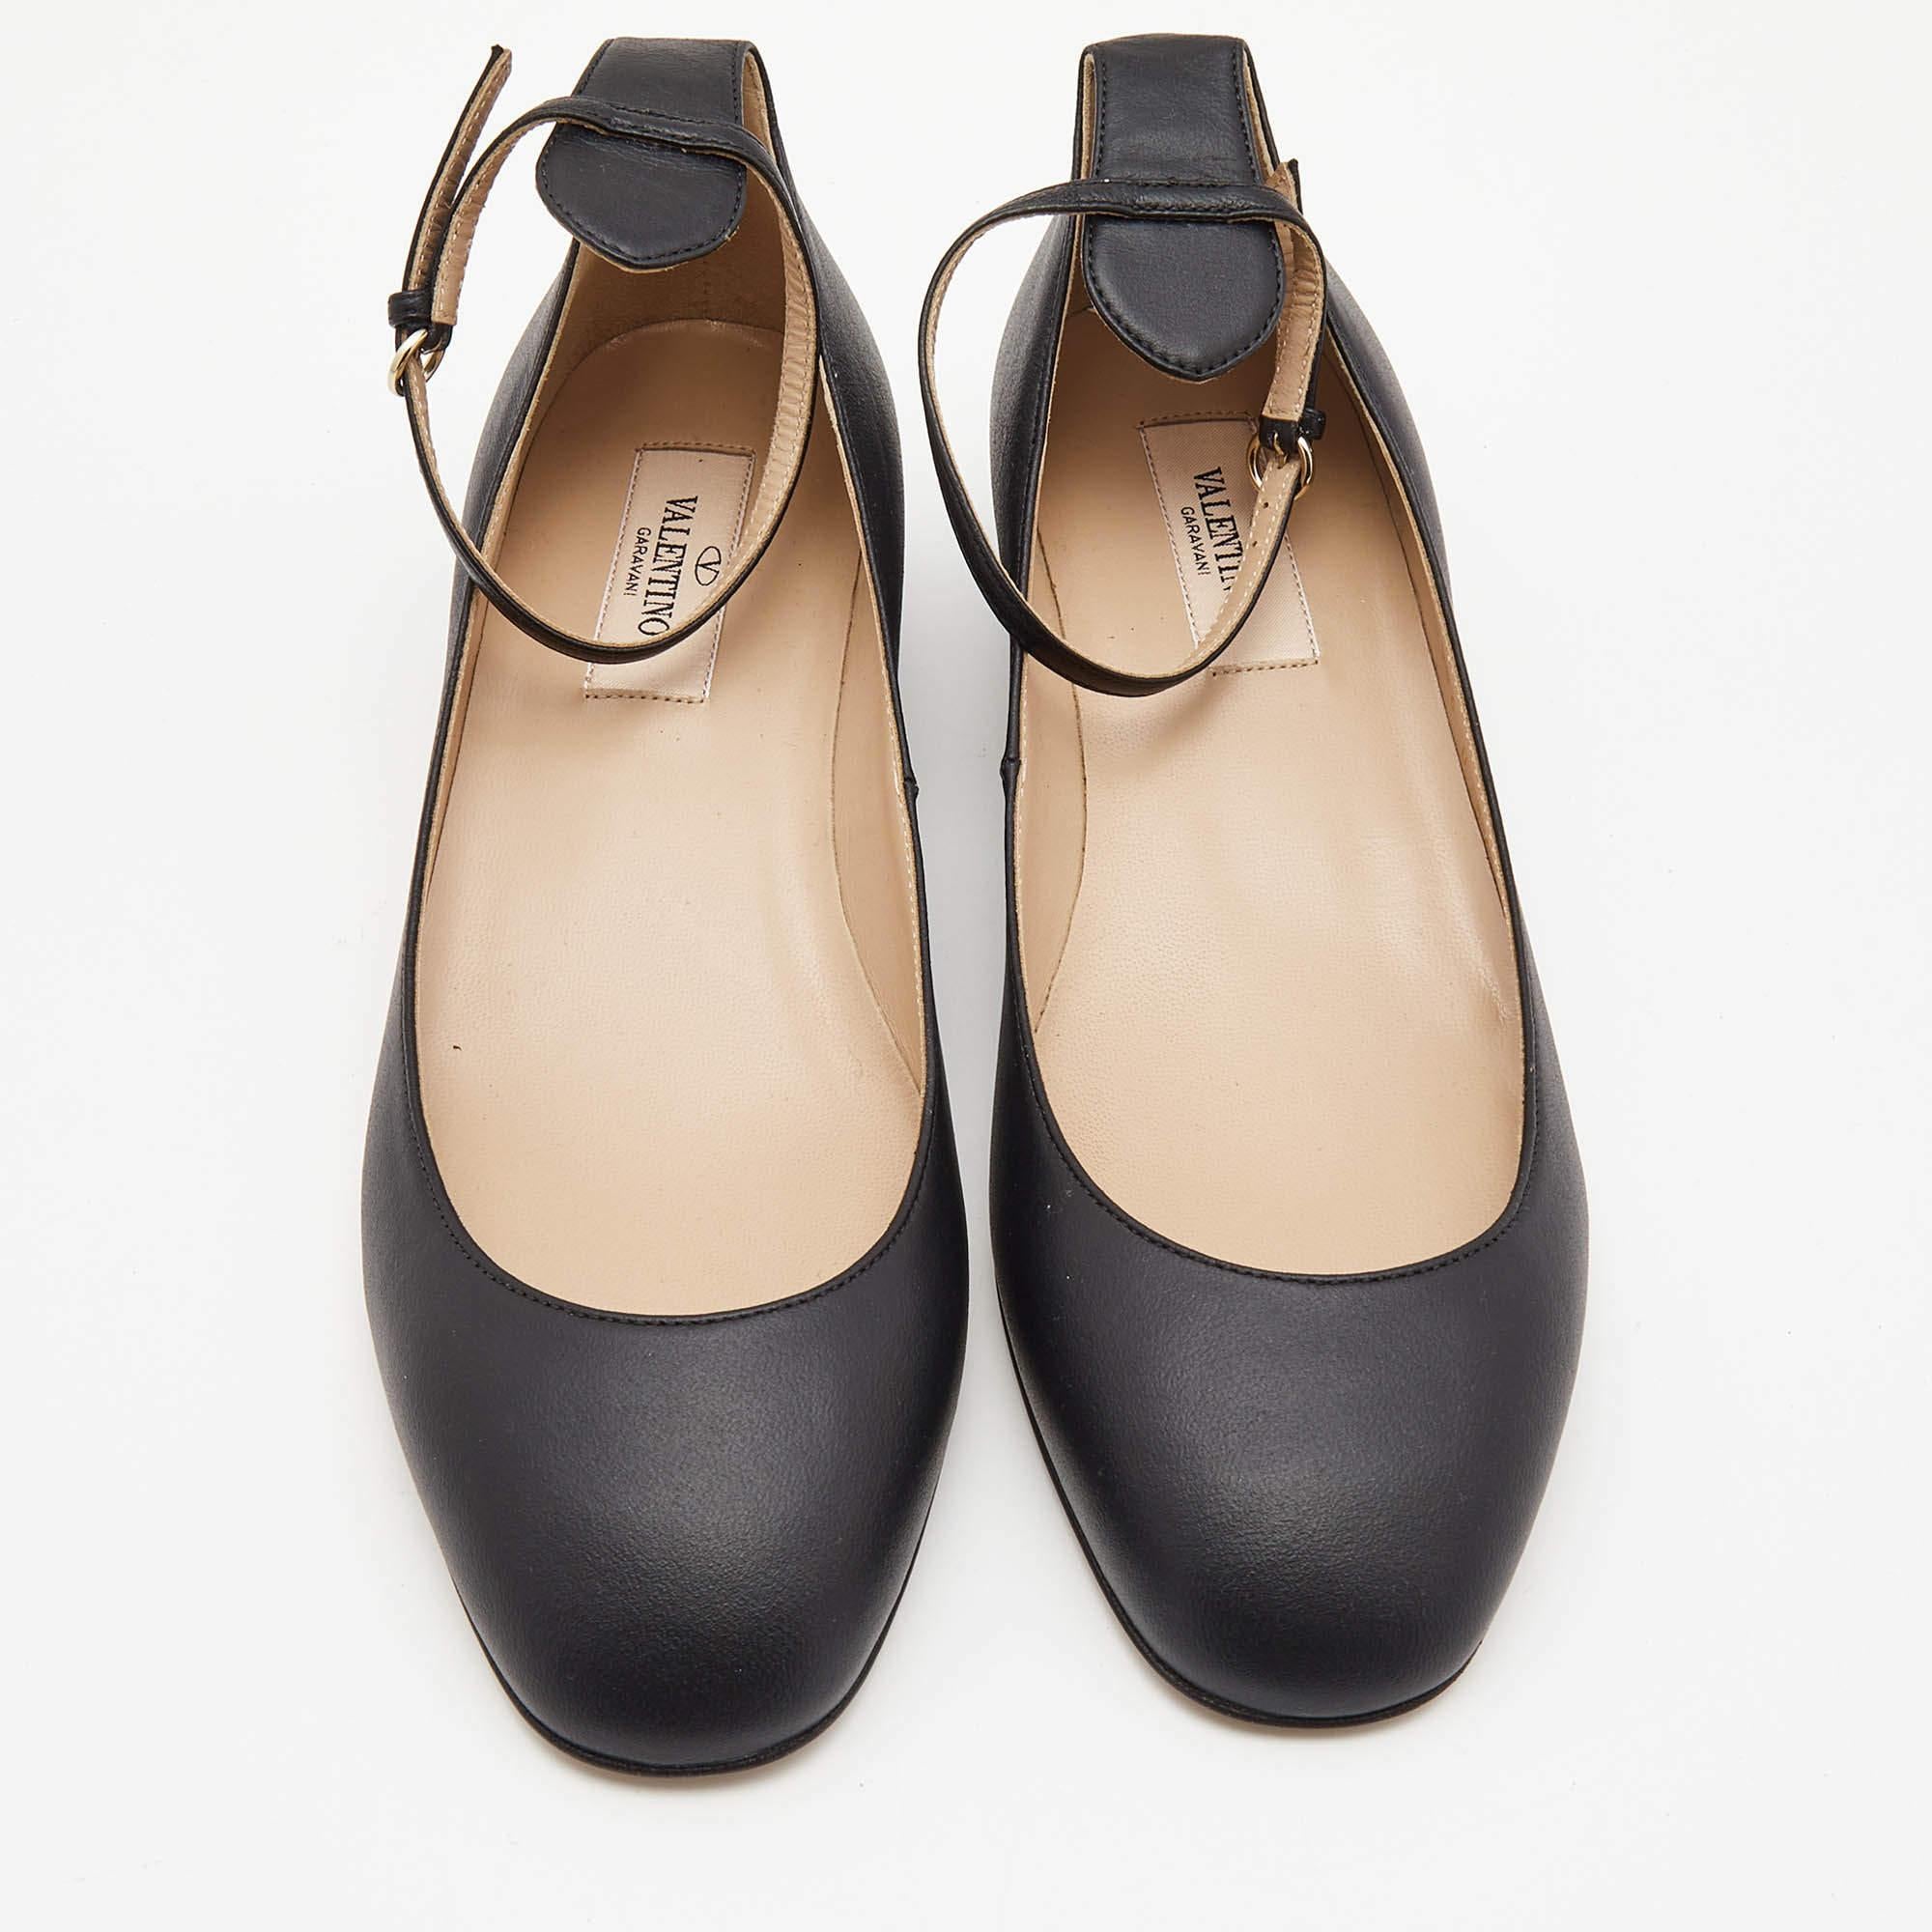 Complete your look by adding these Valentino ballet flats to your lovely wardrobe. They are crafted skilfully to grant the perfect fit and style.

Includes: Original Dustbag, Original Box

